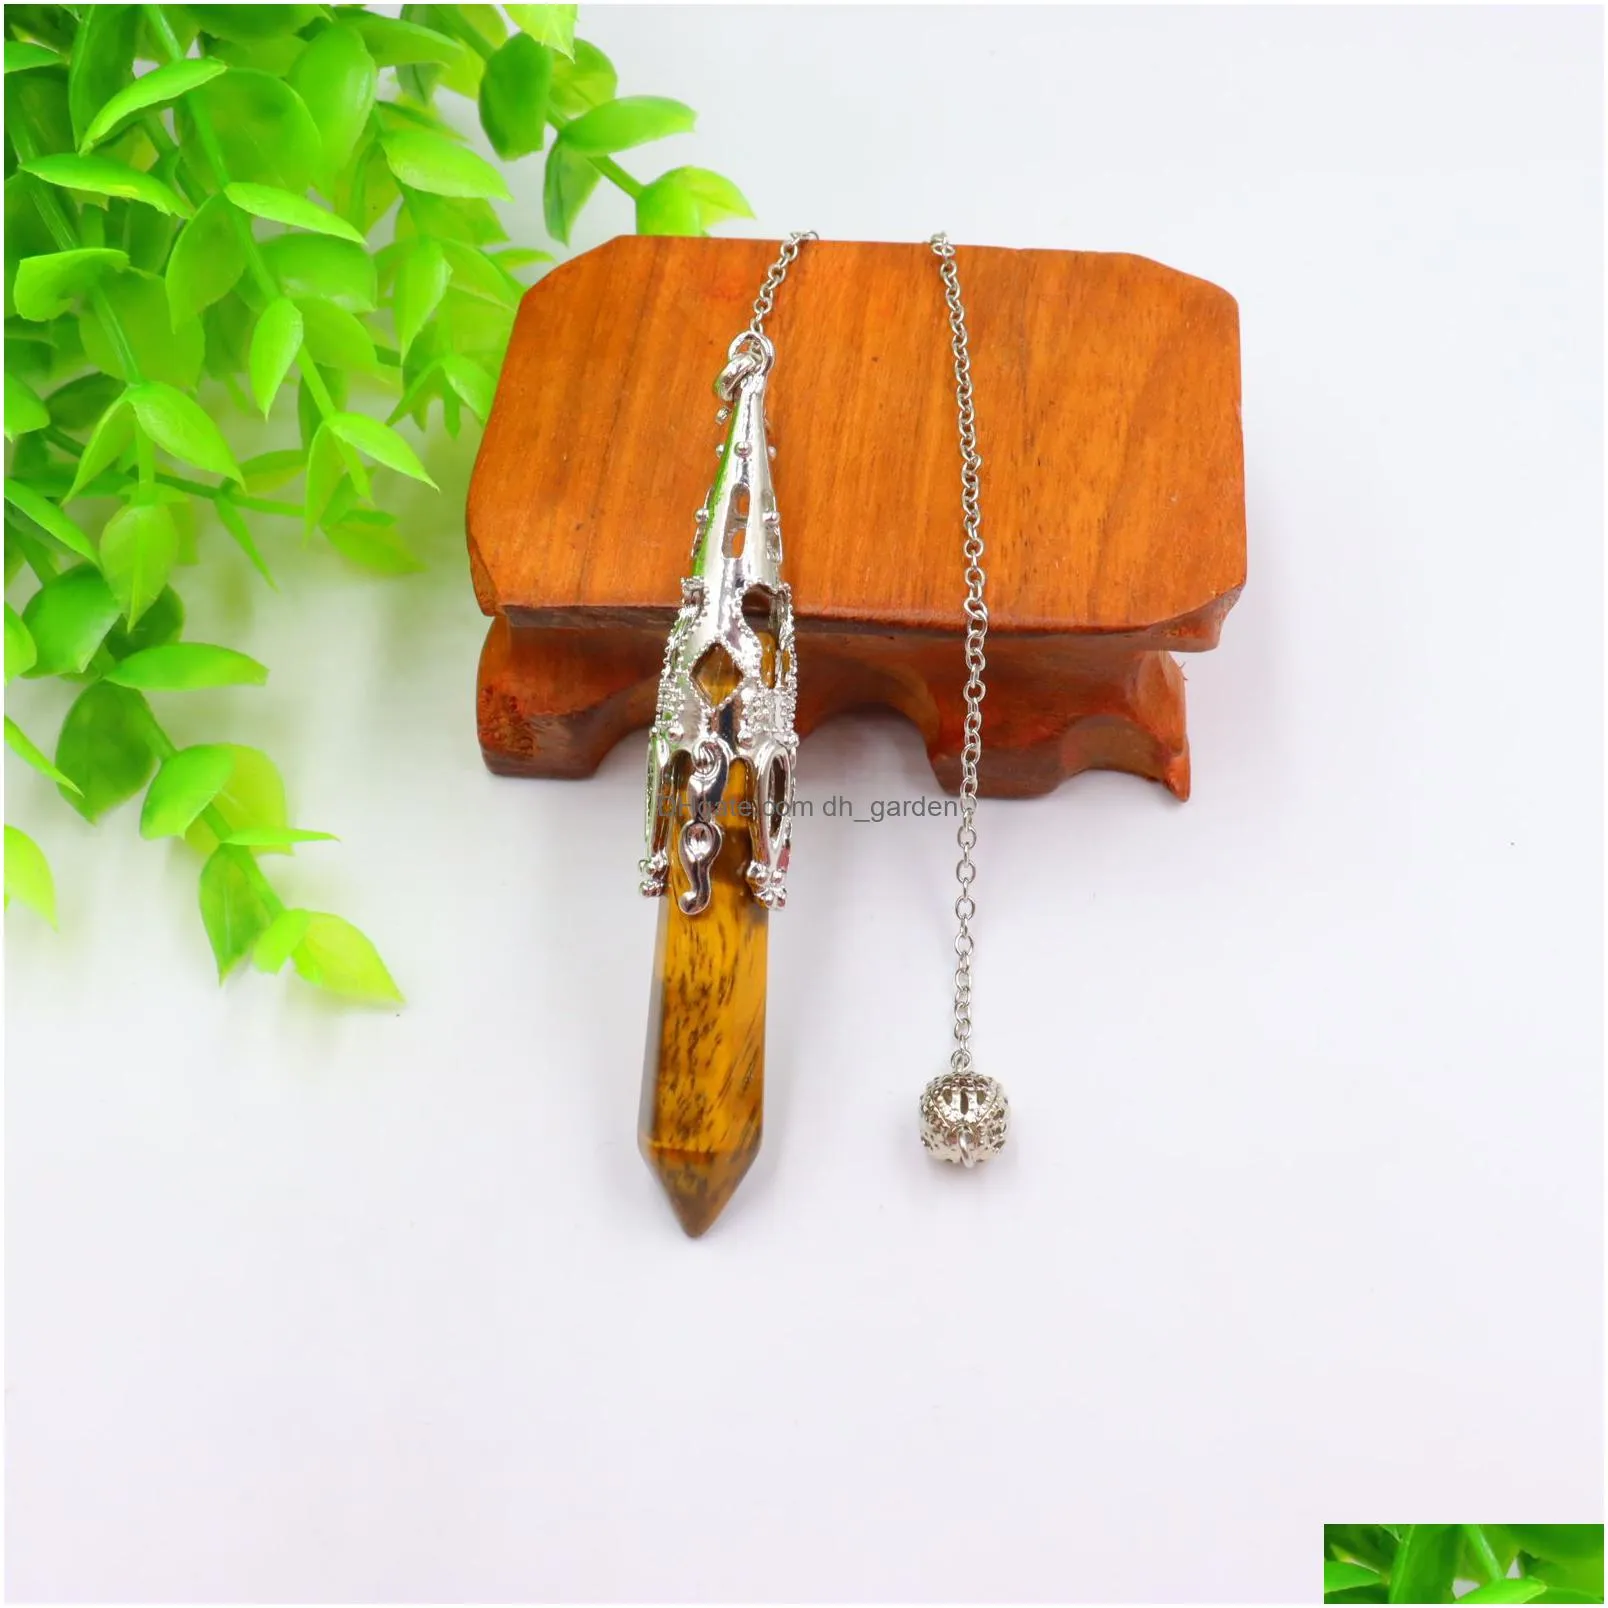 natural stone pendulum charms hexagonal prism shaped pendant link chain for divination crystal jewelry charm amulet healing pendant